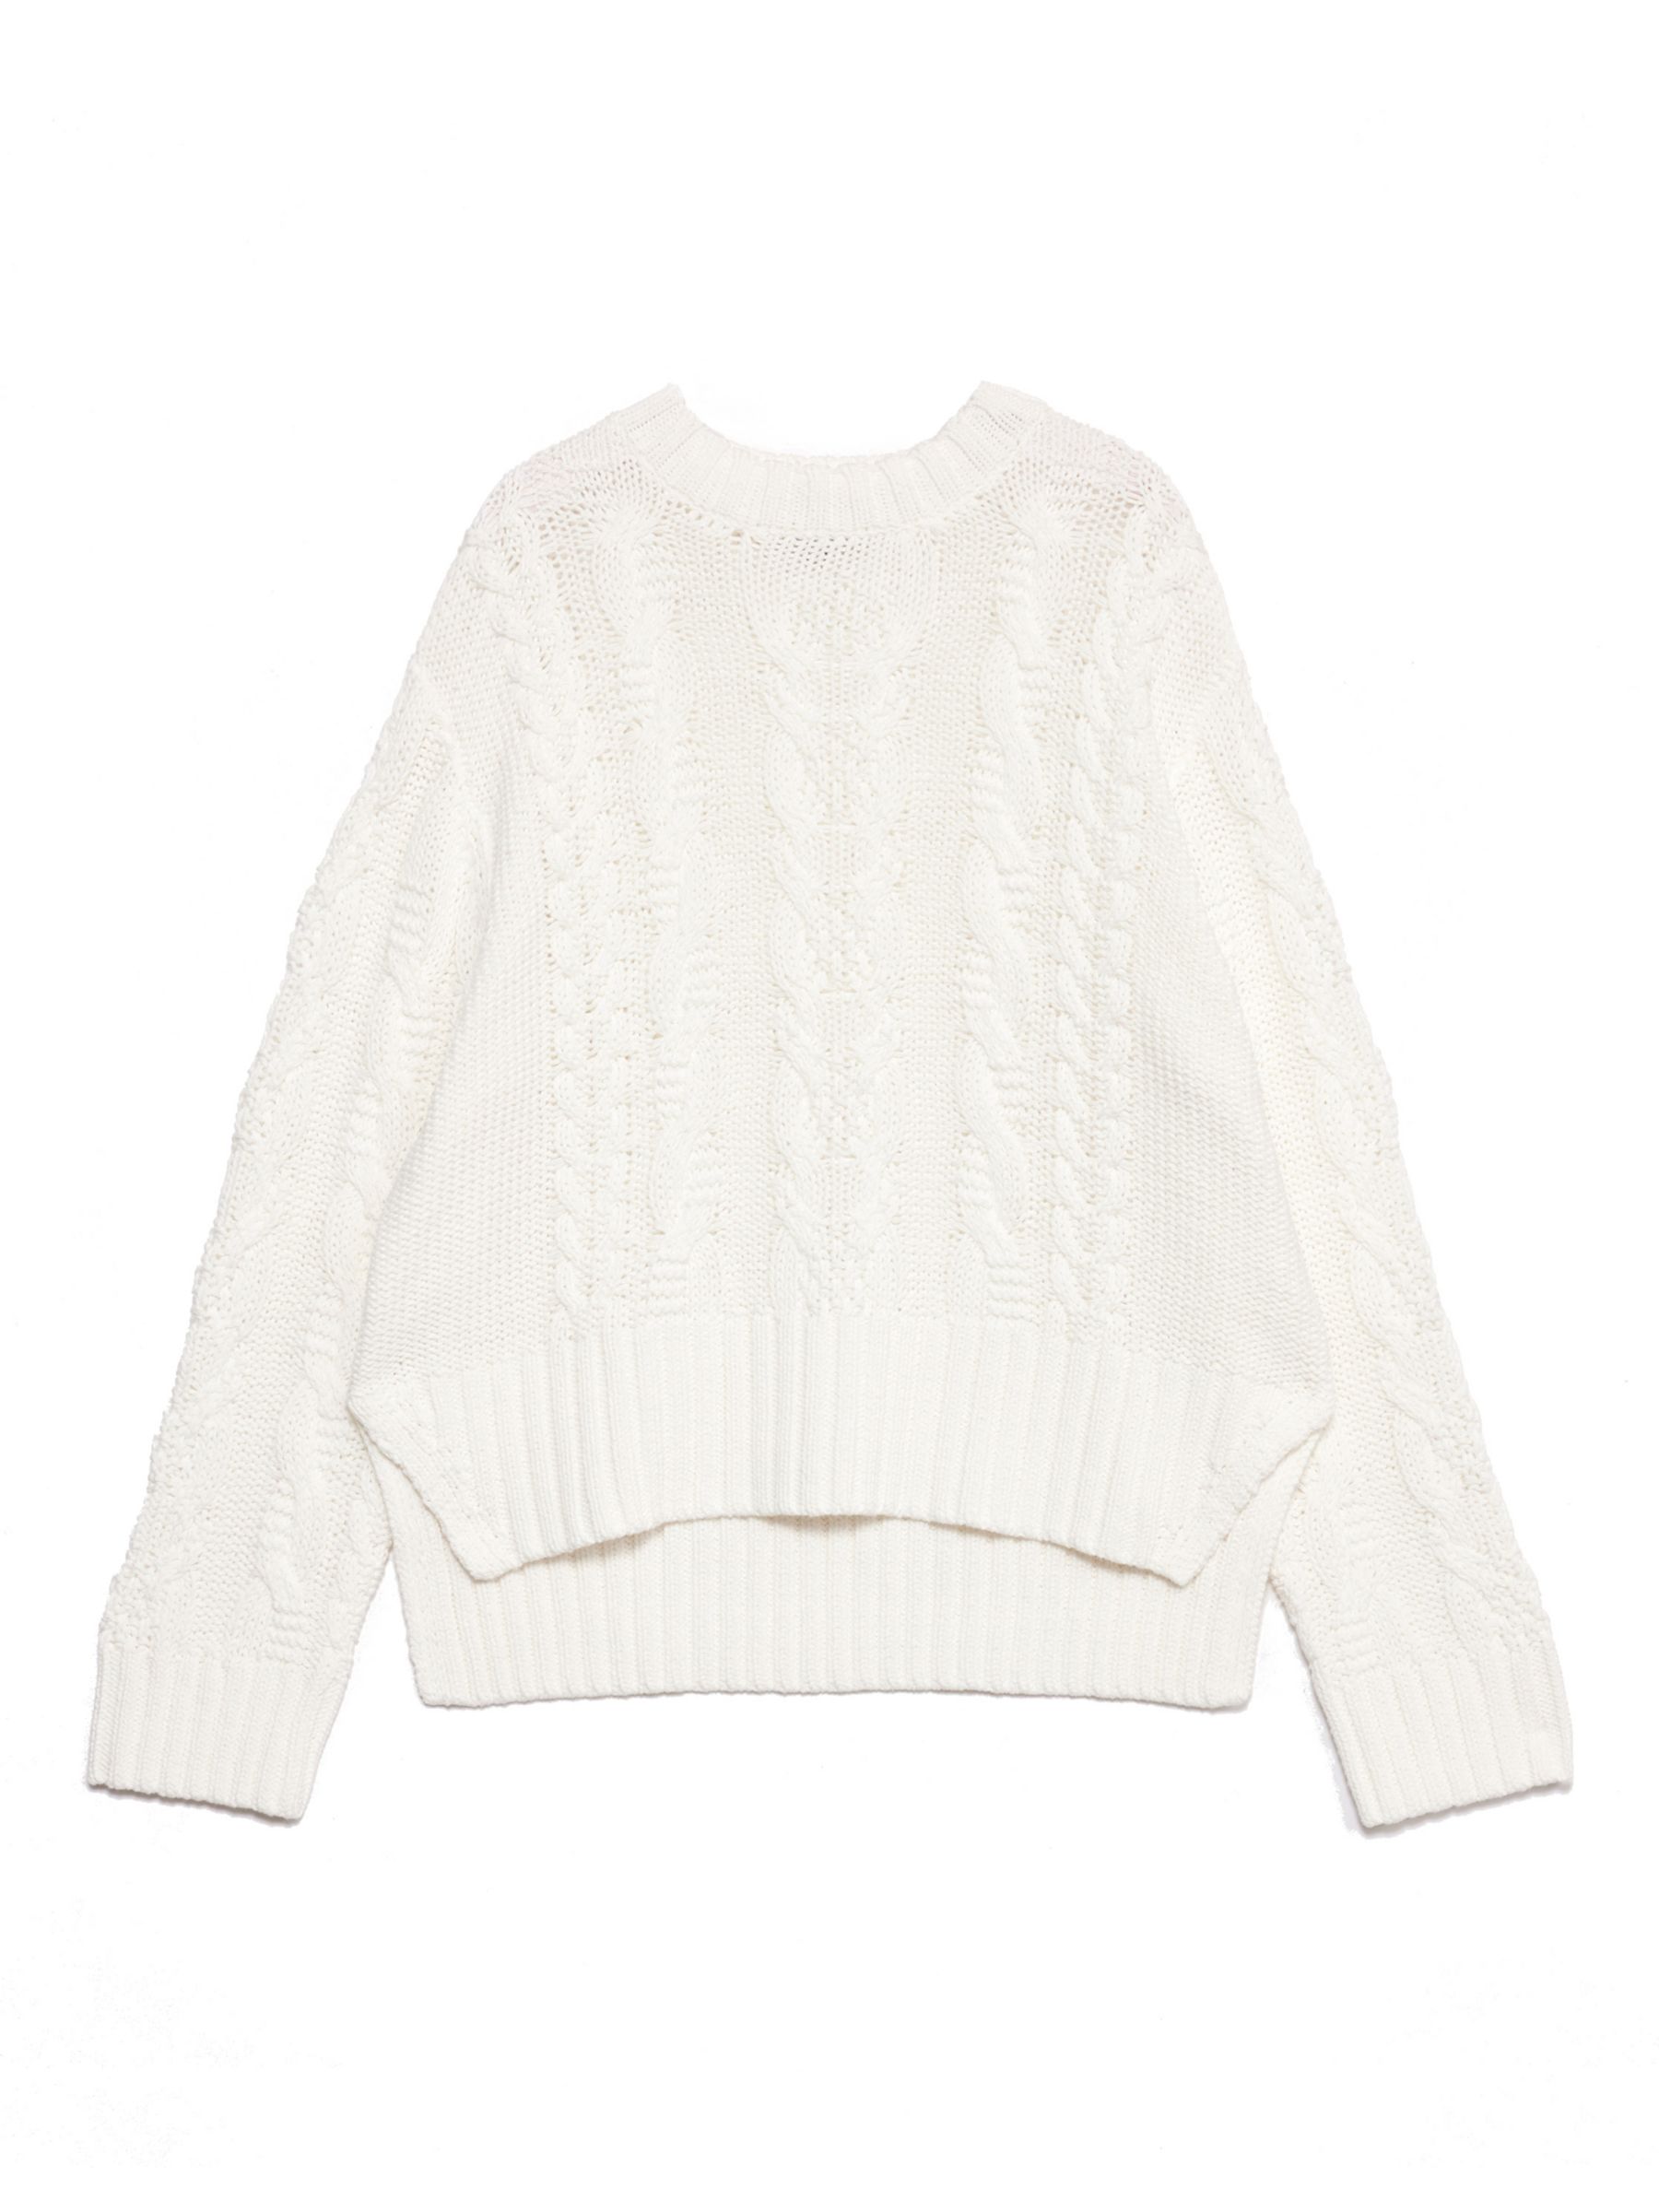 Albaray Cotton Cable Knit Jumper, Cream at John Lewis & Partners